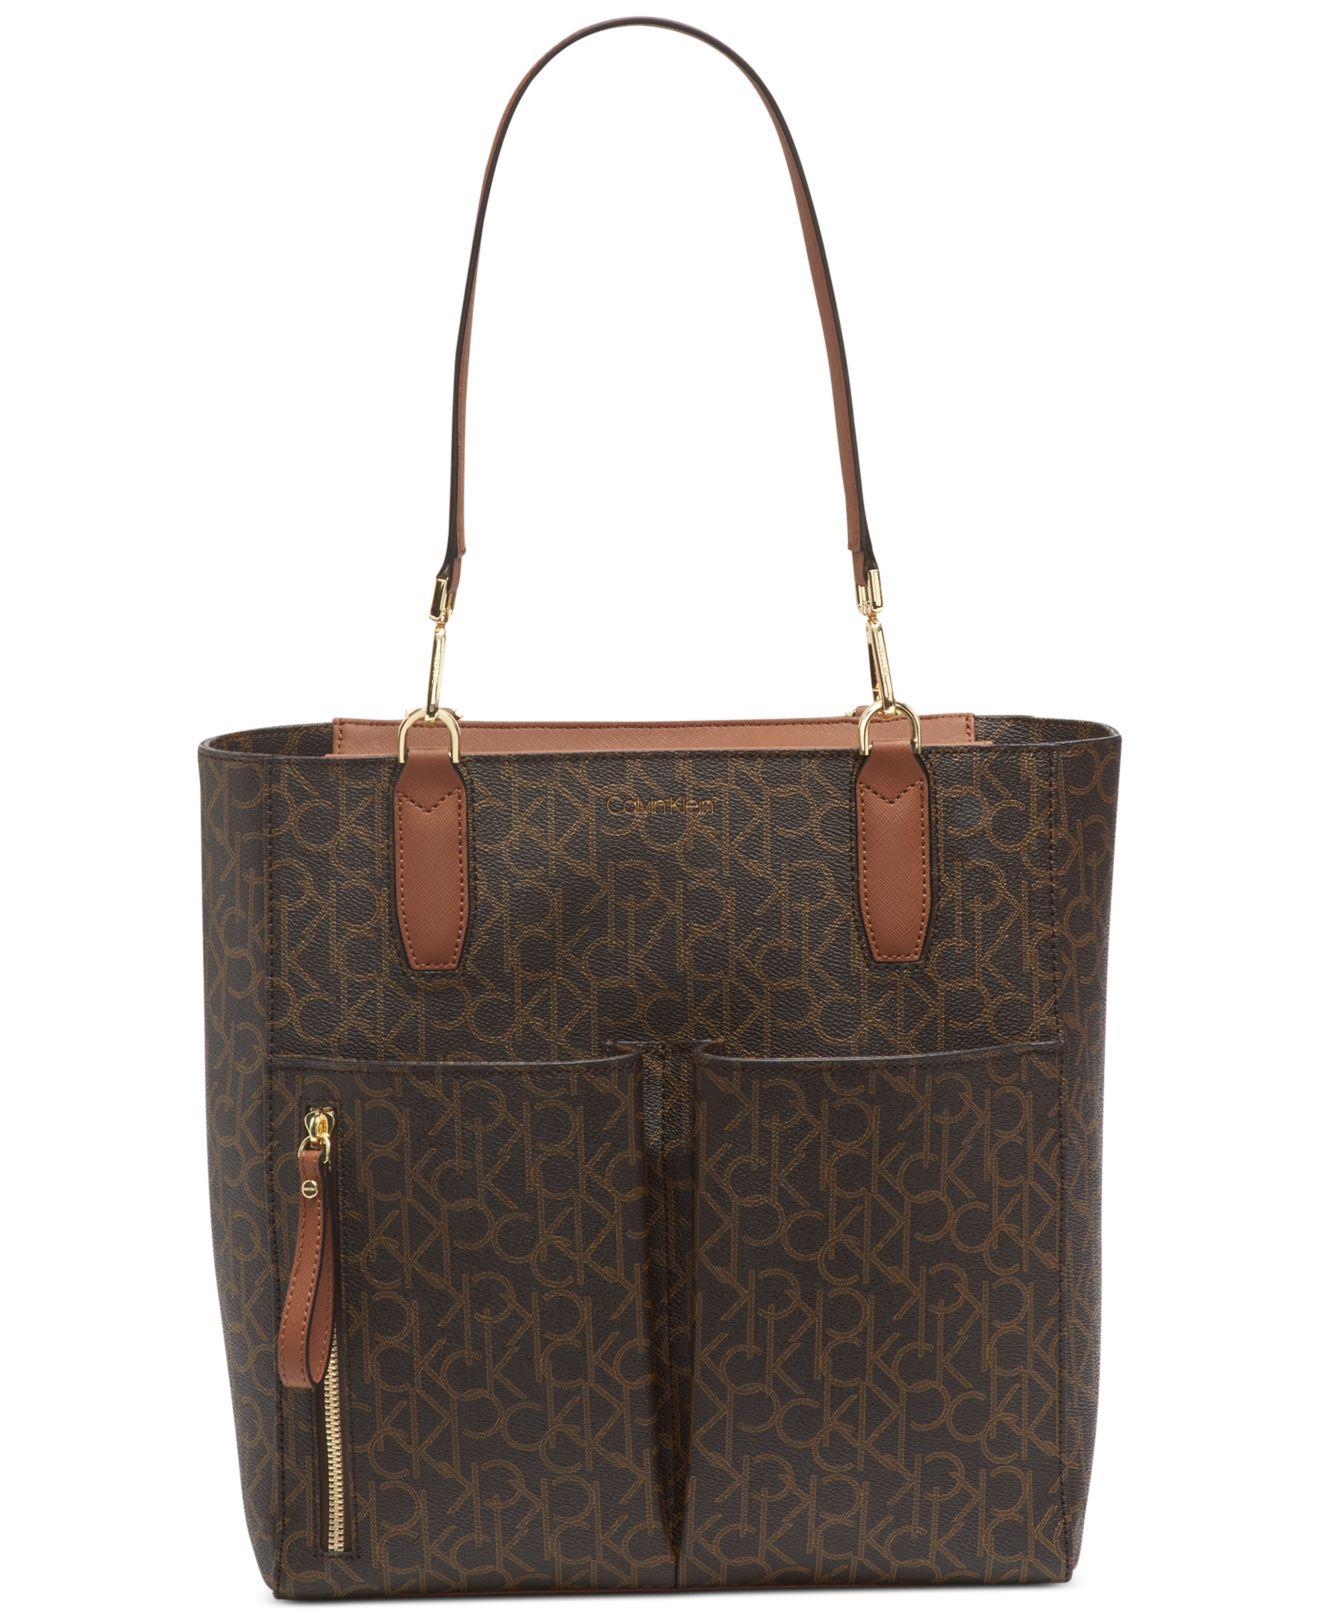 Calvin Klein Elaine North South Signature Tote in Brown - Lyst